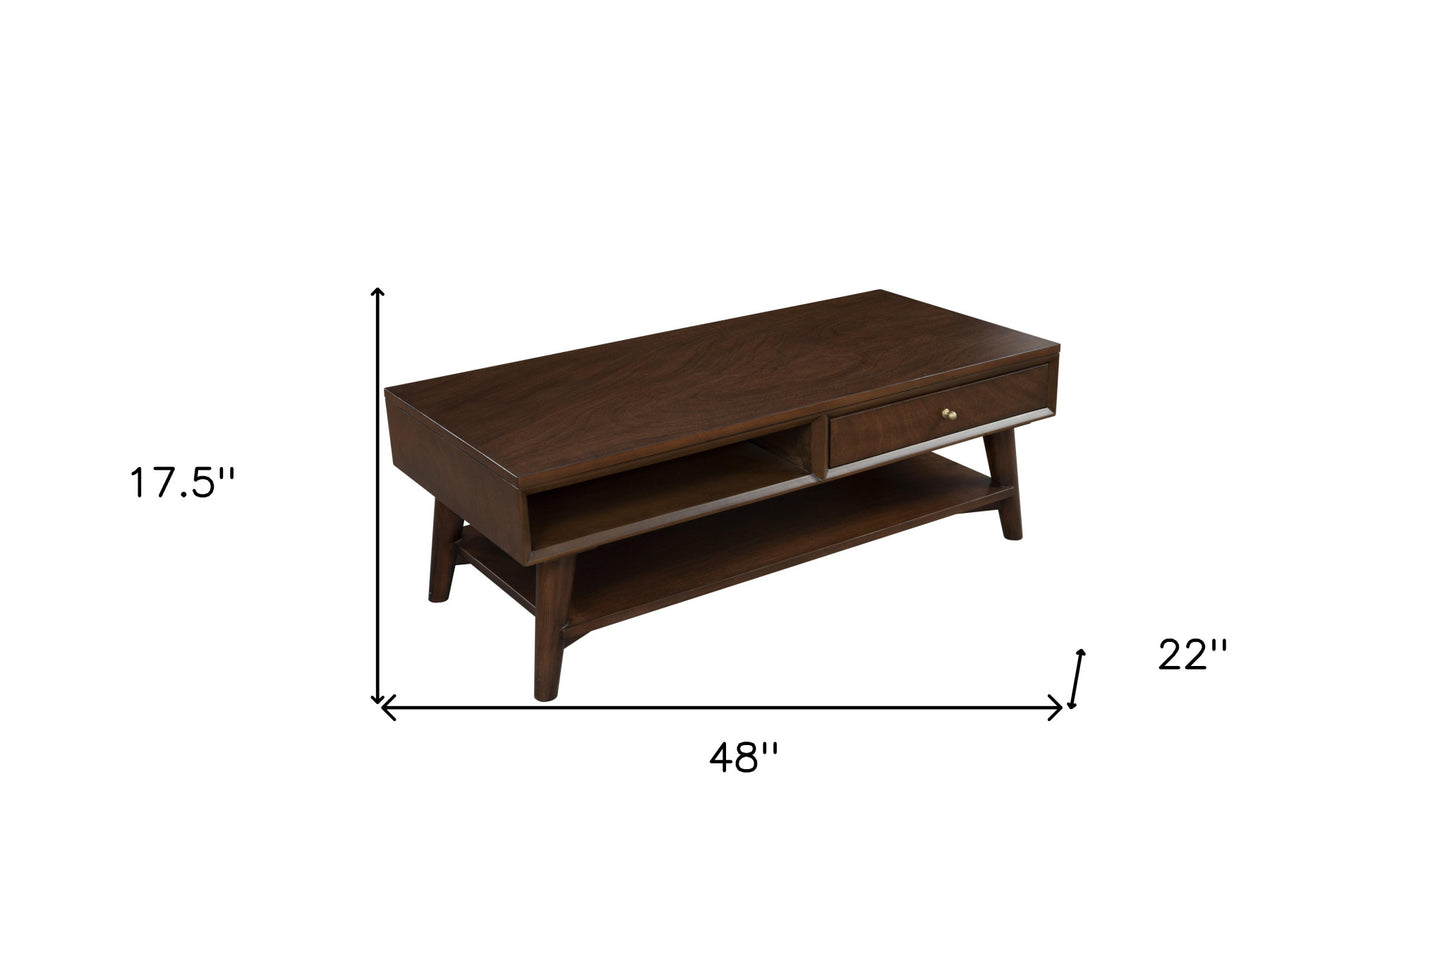 48" Brown Solid And Manufactured Wood Coffee Table With Drawer